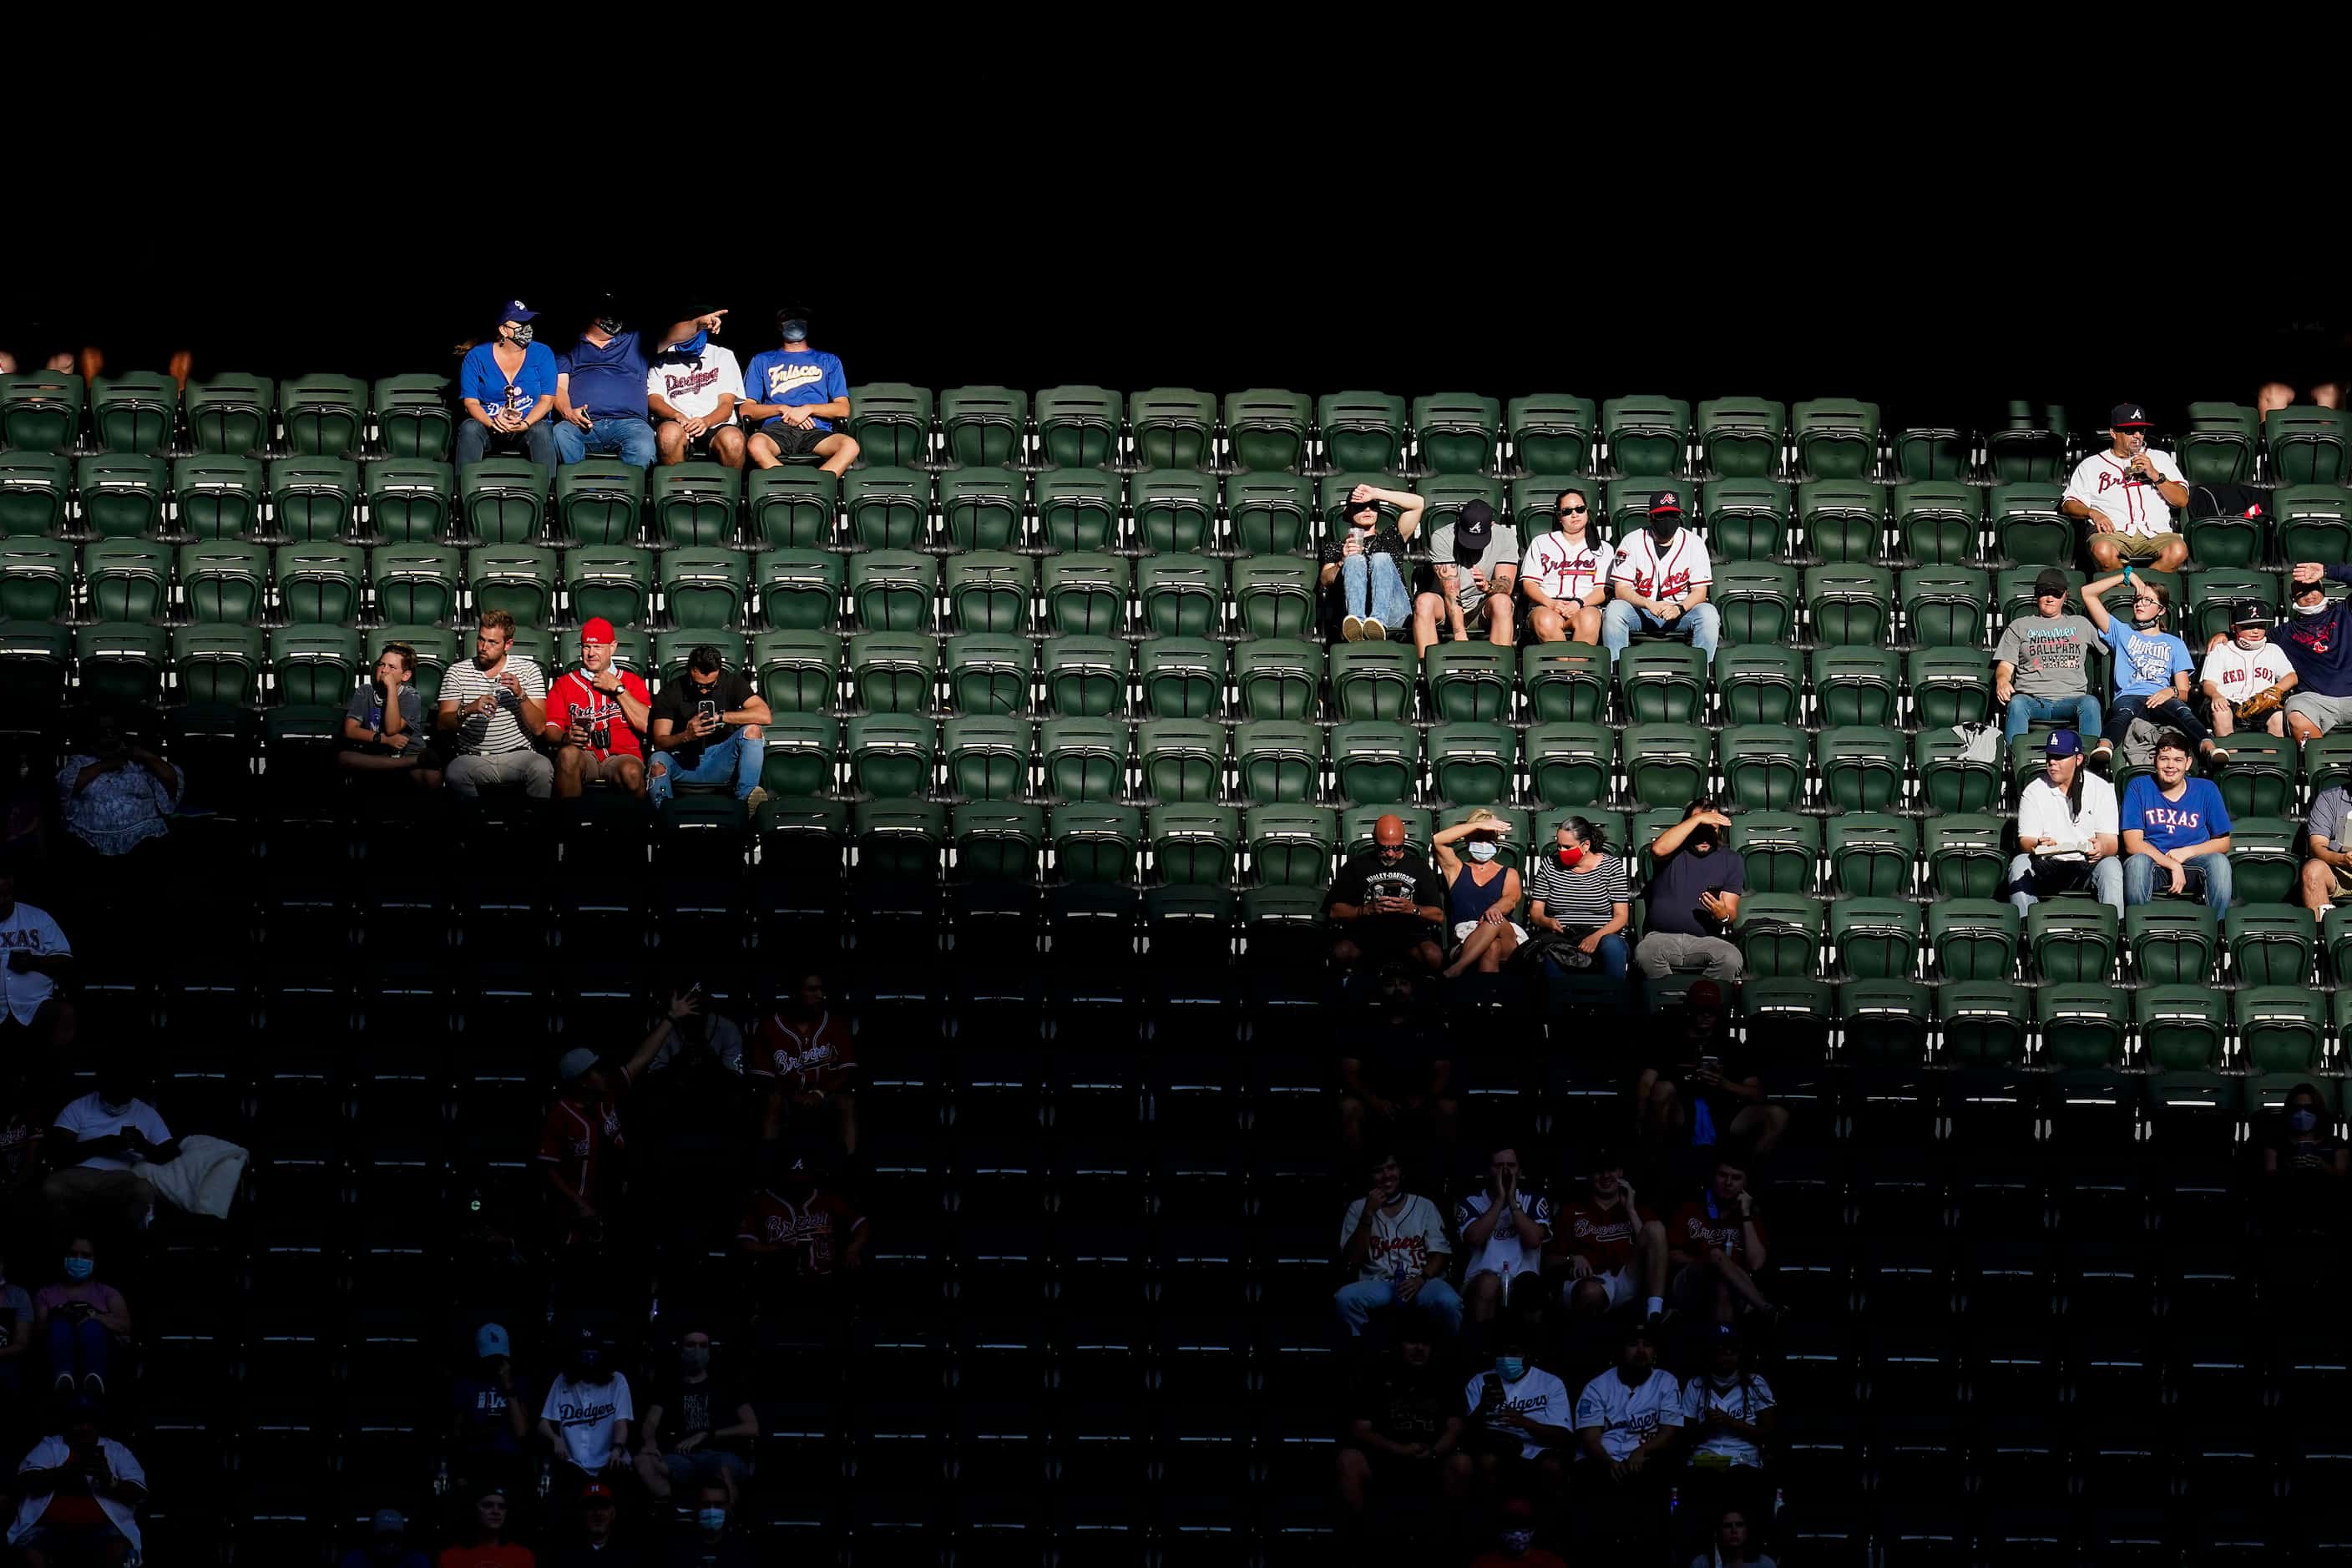 Fans sit socially distanced in the right field stands as sunlight falls over the stadium...